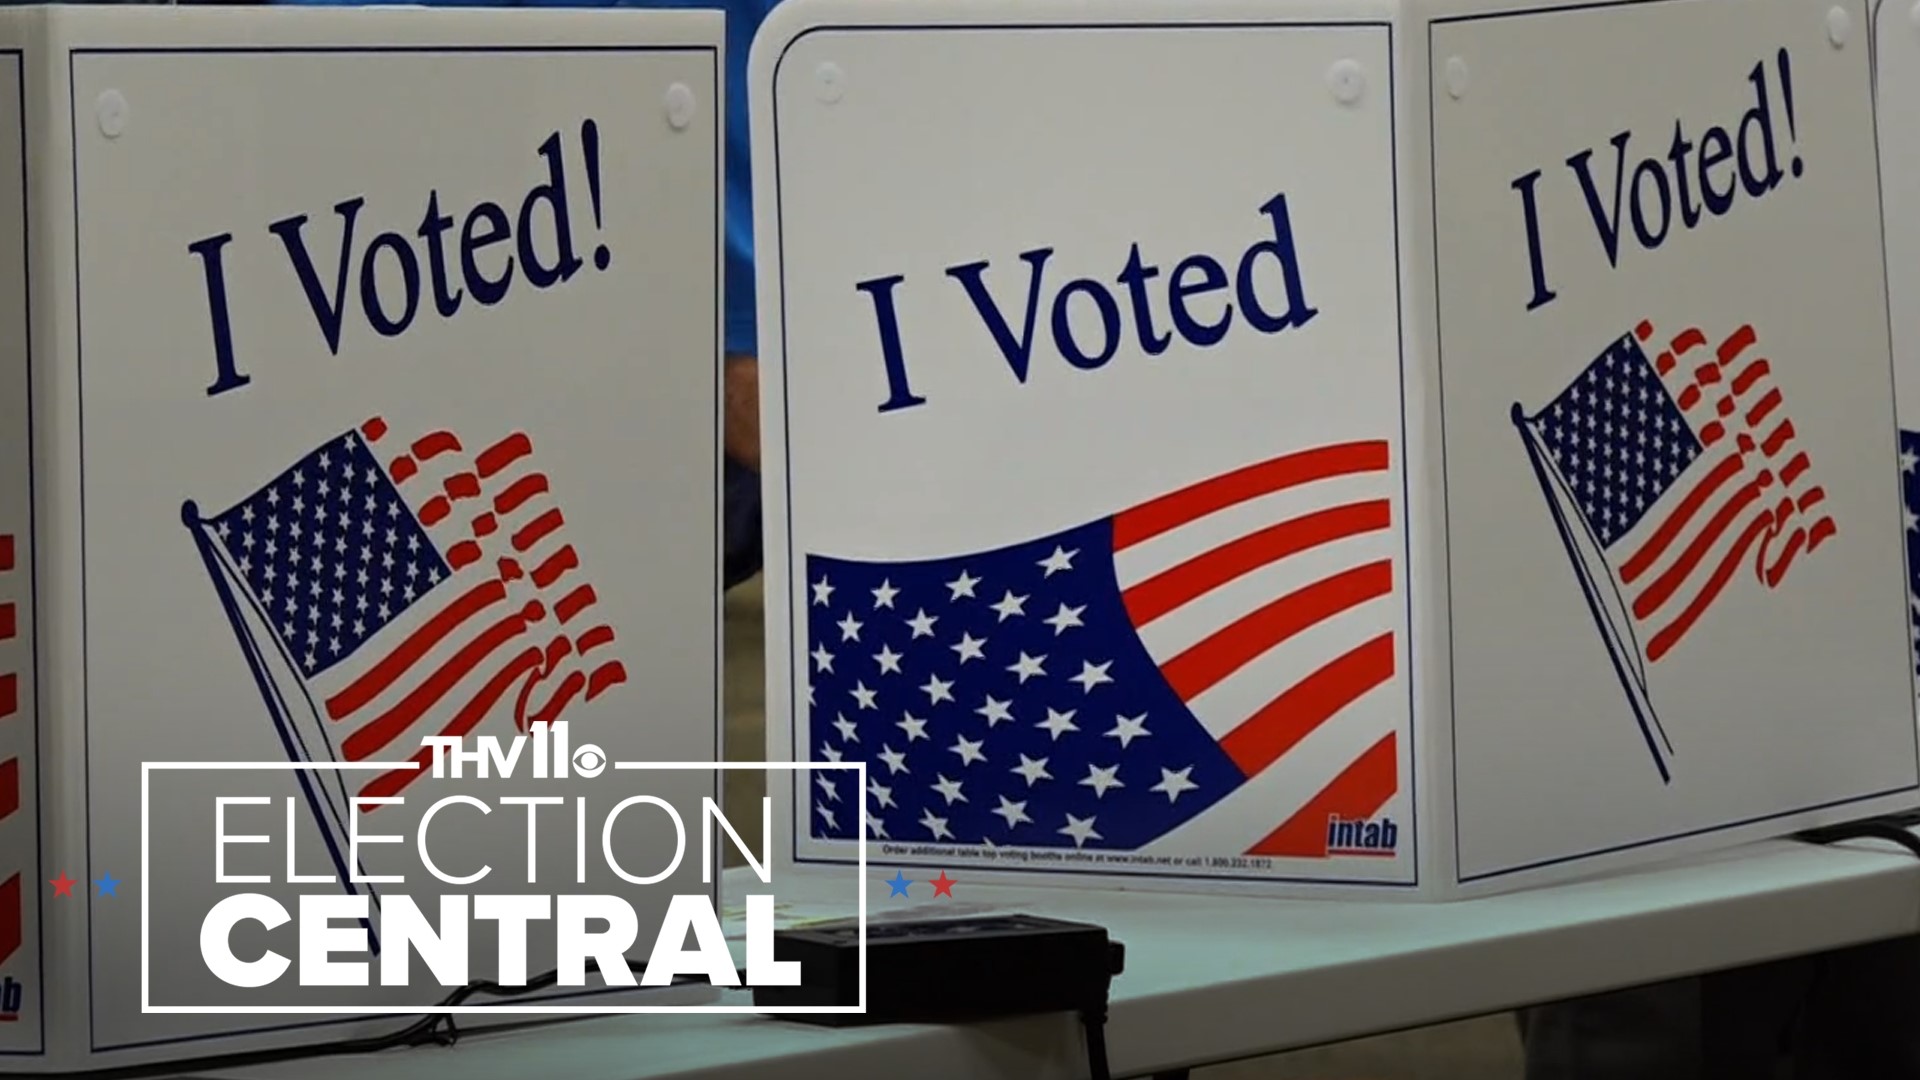 In a contentious election year and national politics already seeing threats, we spoke to officials about how they intend to keep the polls safe for voters.